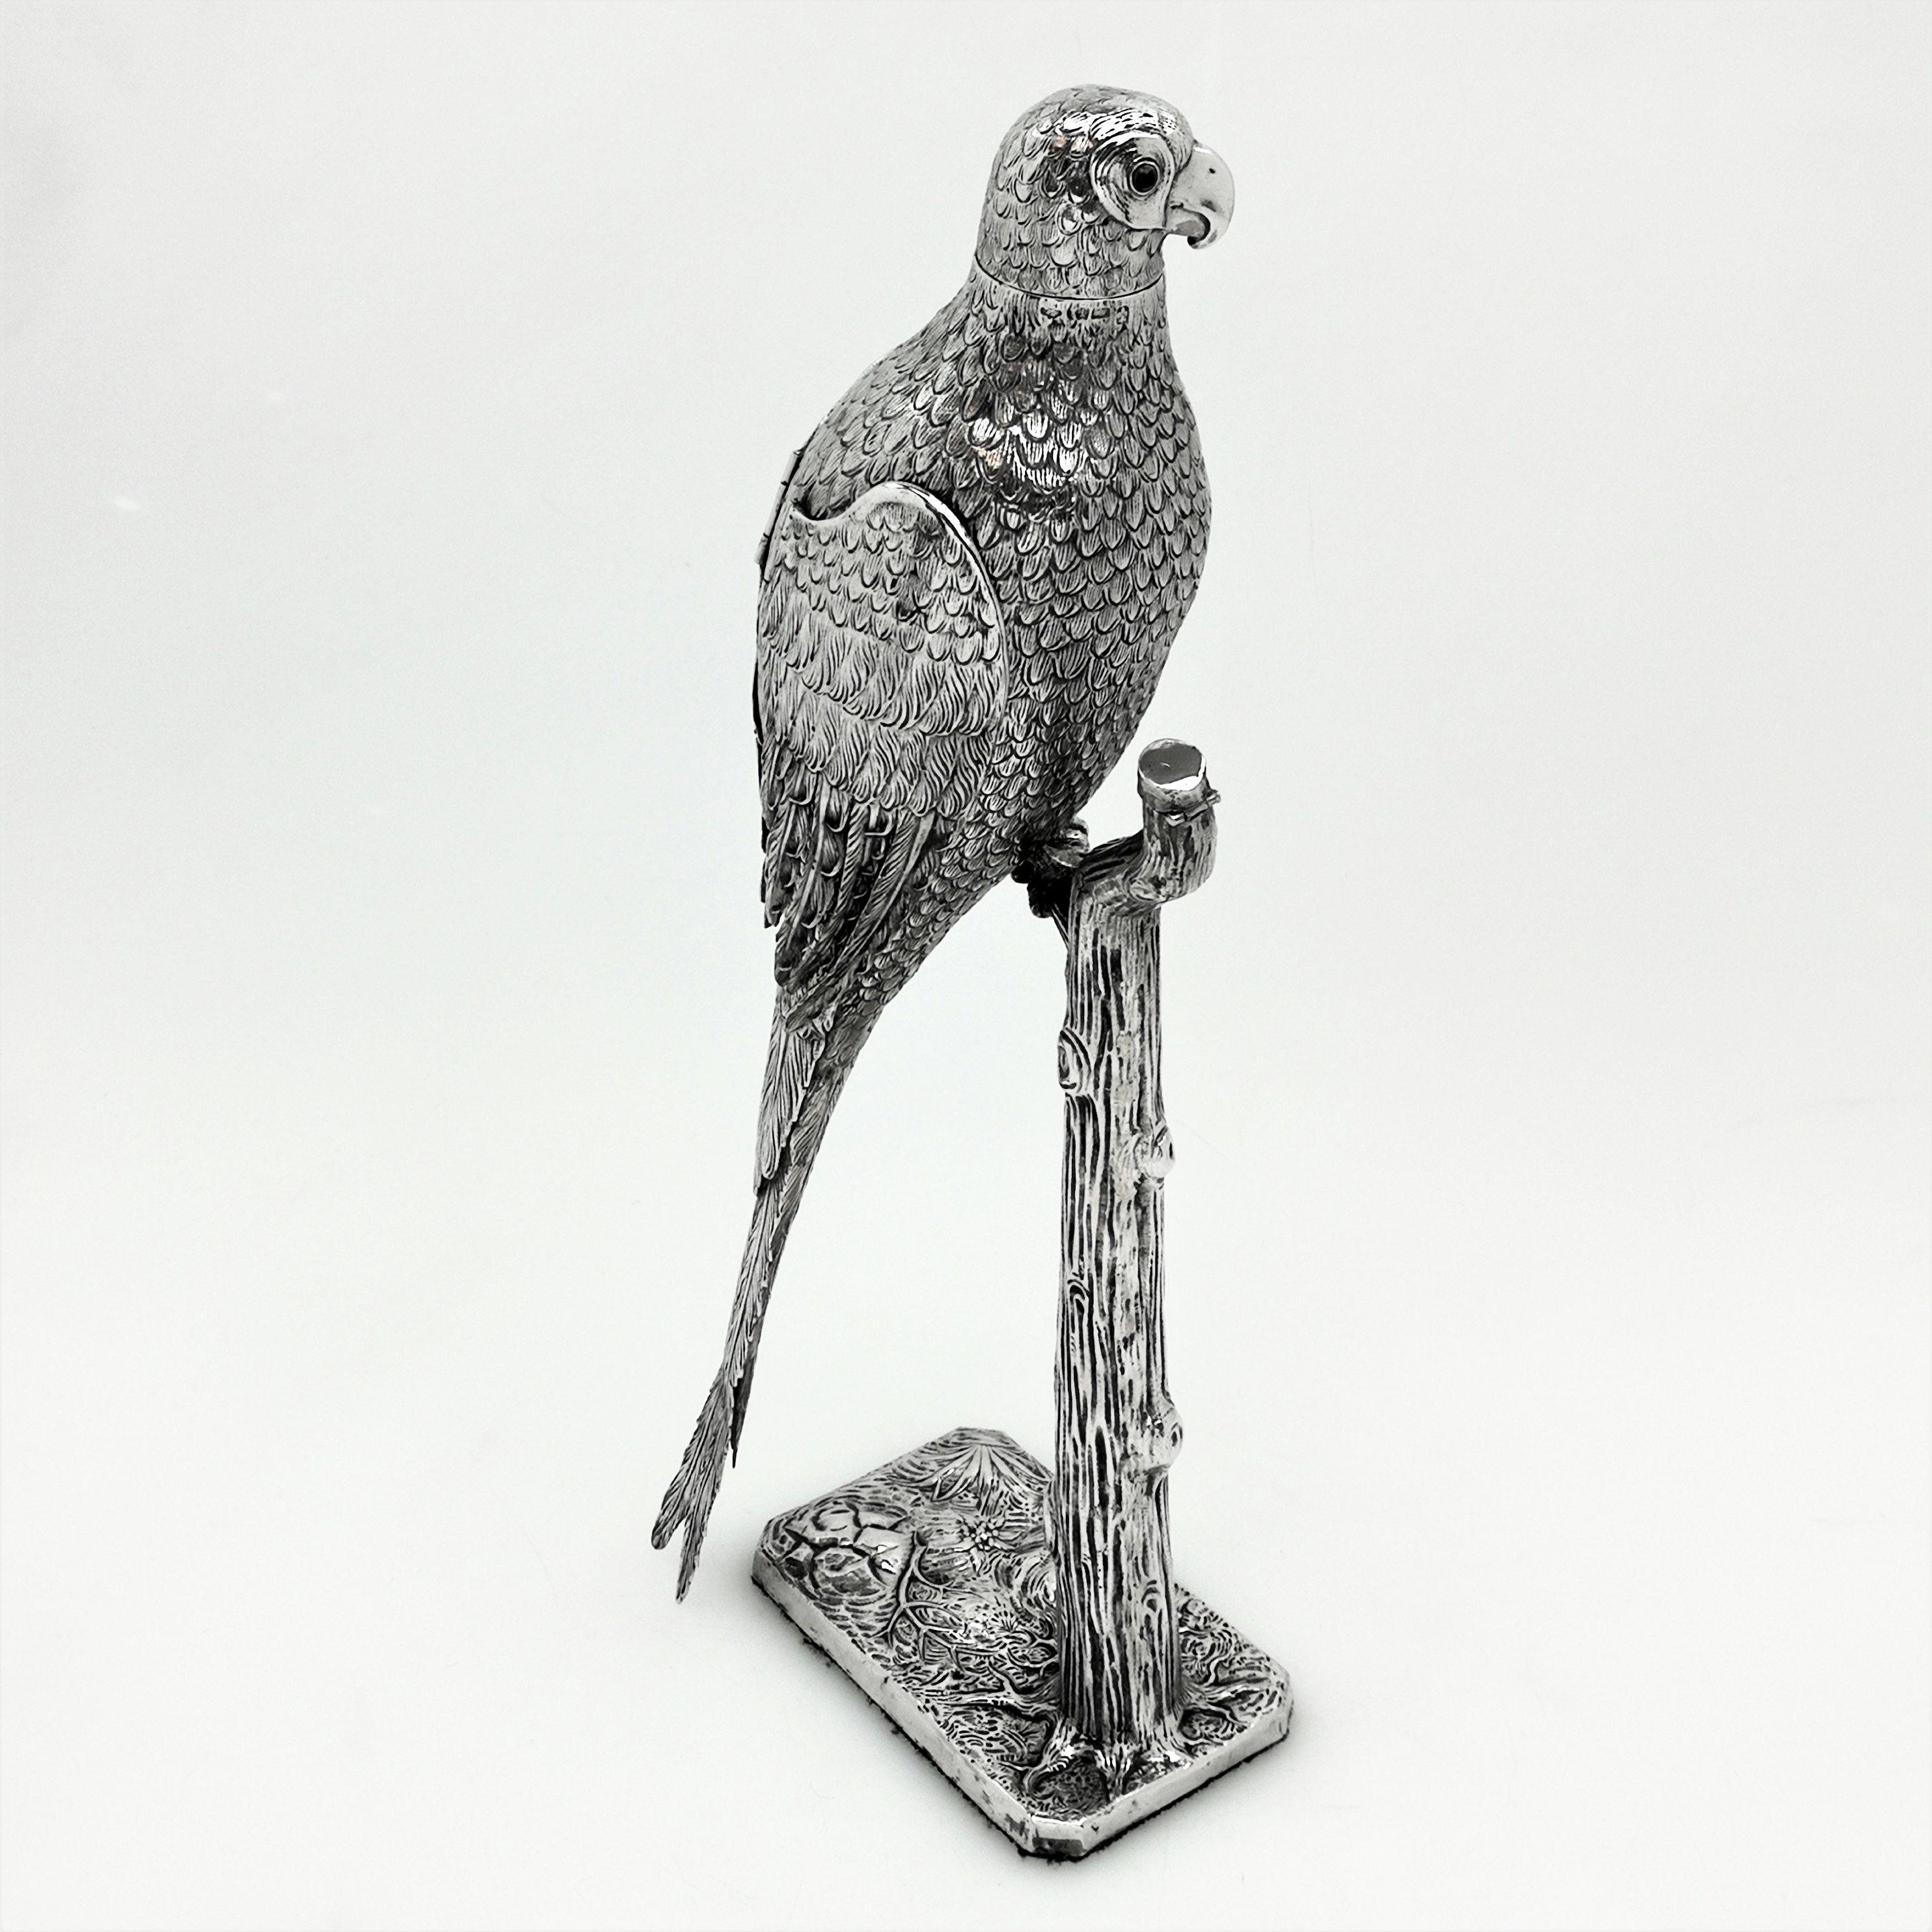 An impressive antique German solid silver figurine showing a parrot on stand created with an impressive attention to detail. The parrot perches on a branch above a chased rectangular base. The parrot has hinged wings and has yellow and black glass